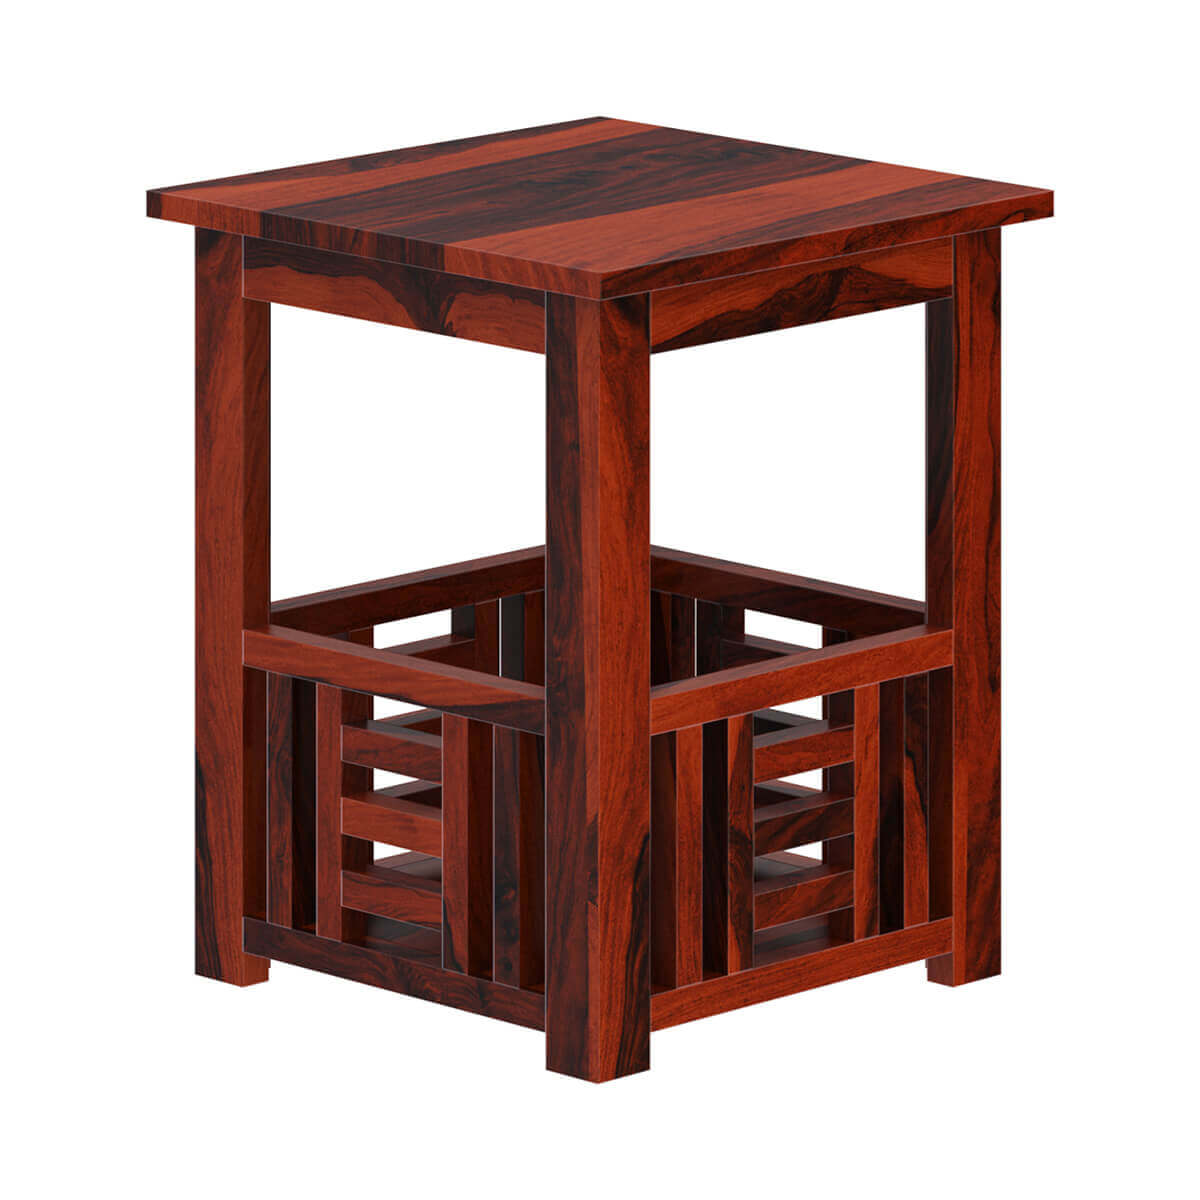 https://www.sierralivingconcepts.com/images/thumbs/0398591_yantis-mission-style-rustic-solid-wood-basket-2-tier-end-table.jpeg